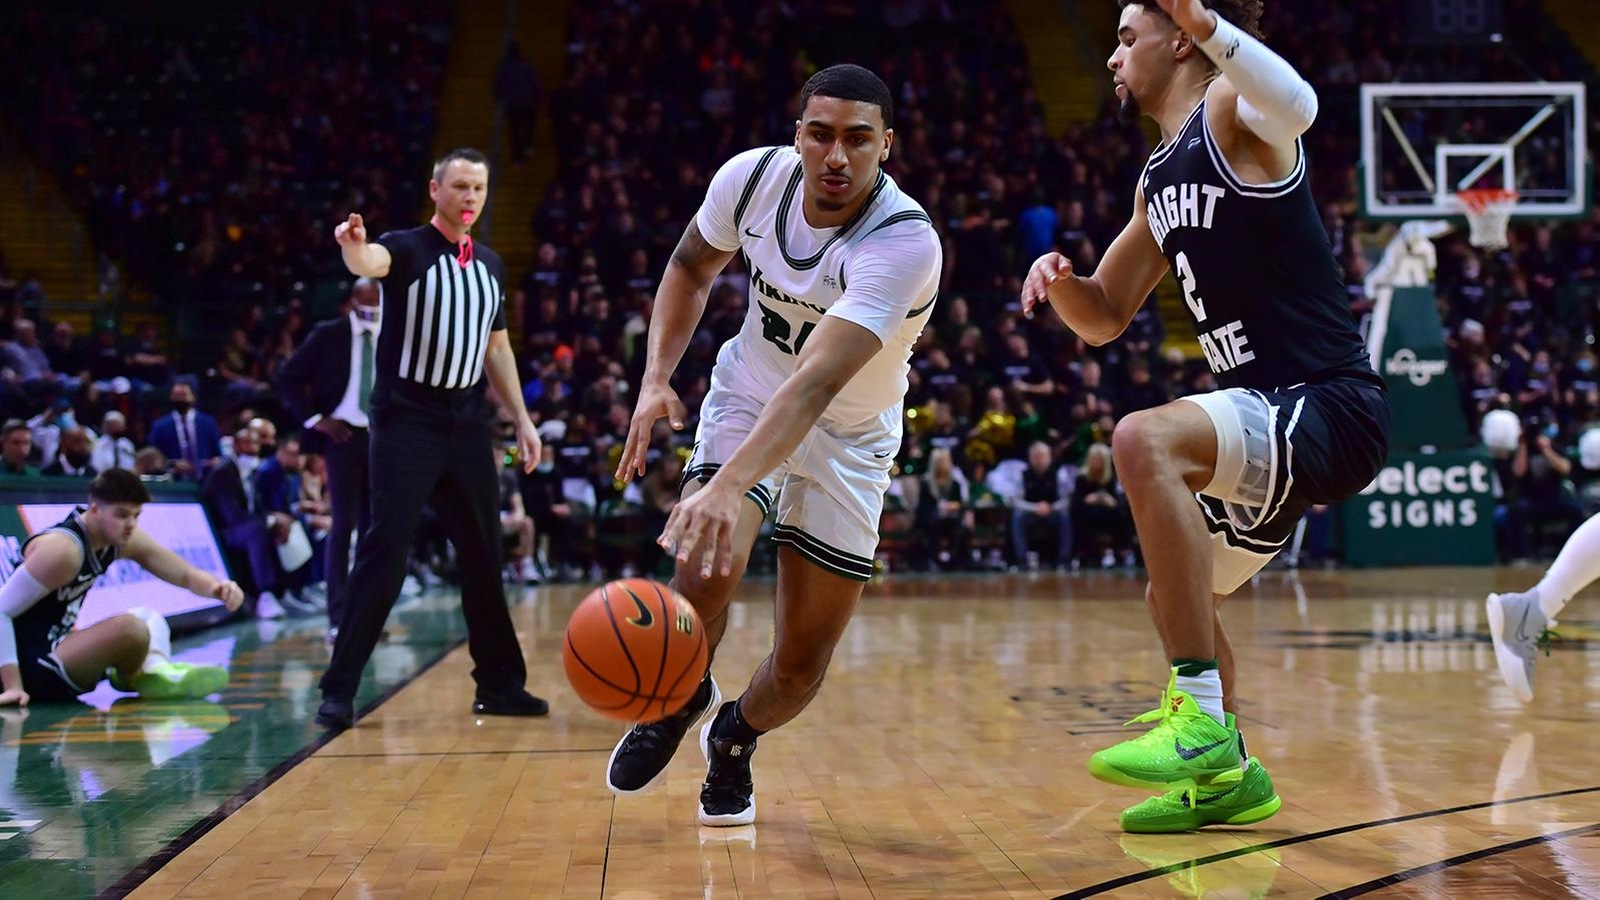 Cleveland State Men’s Basketball Earns 71-67 Victory At Wright State On National Television